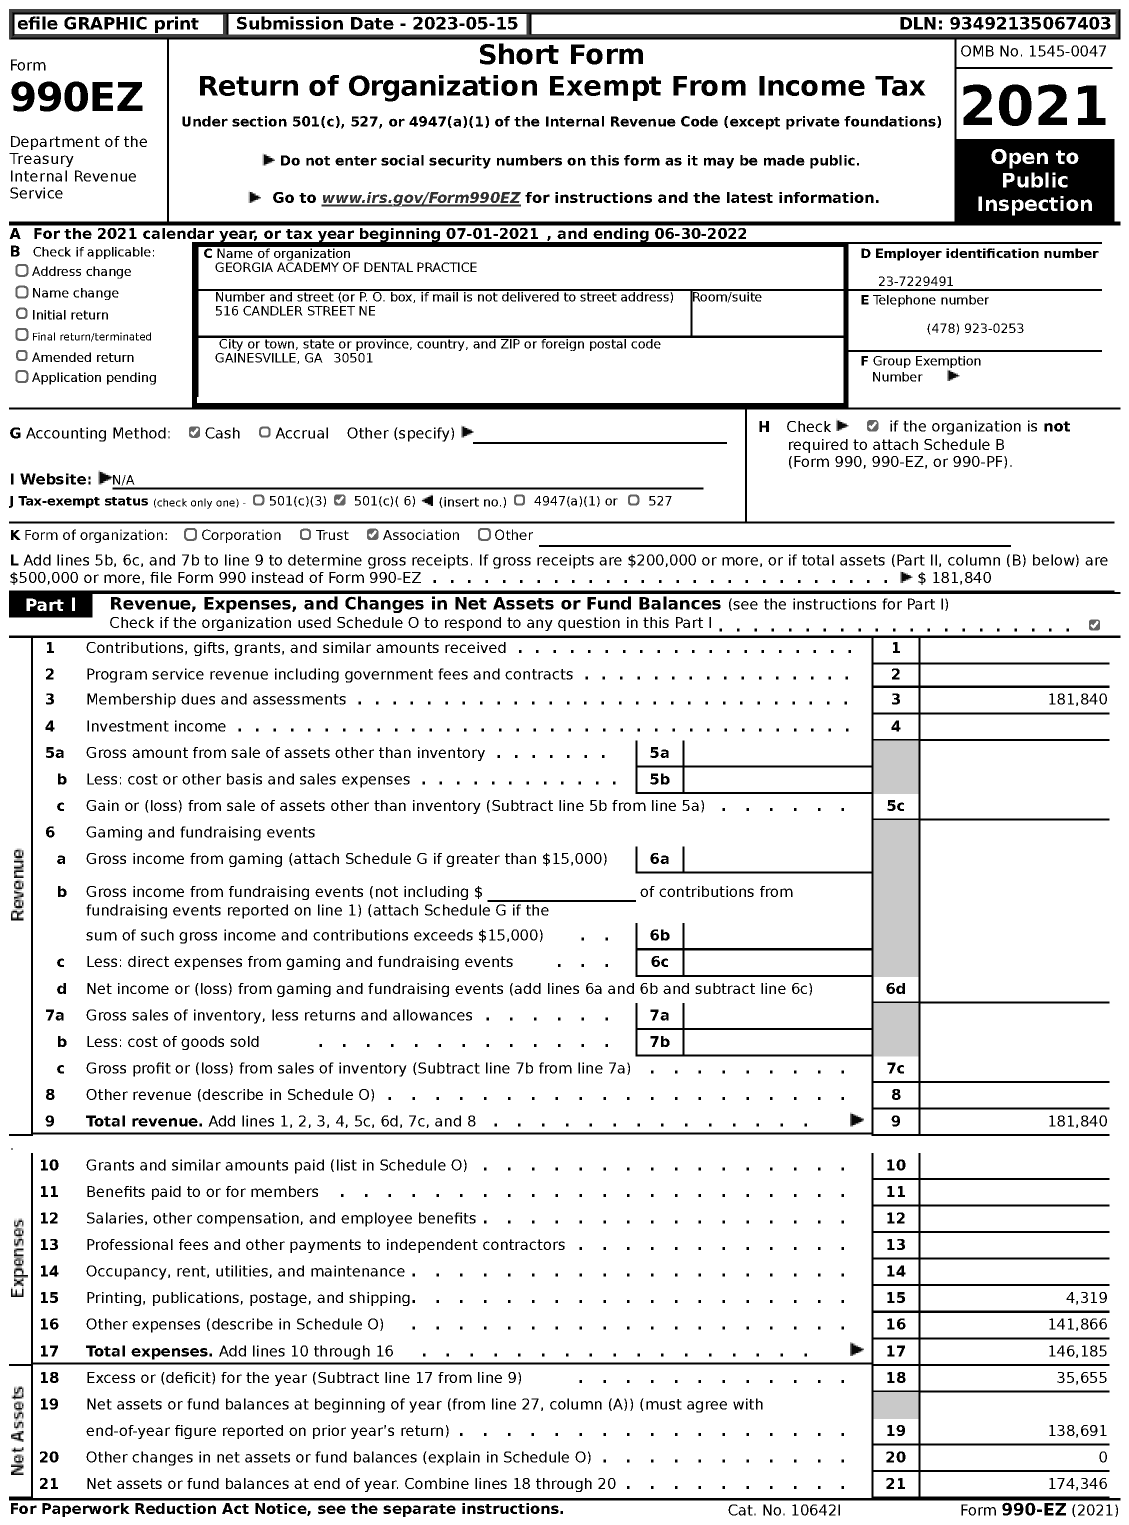 Image of first page of 2021 Form 990EZ for Georgia Academy of Dental Practice